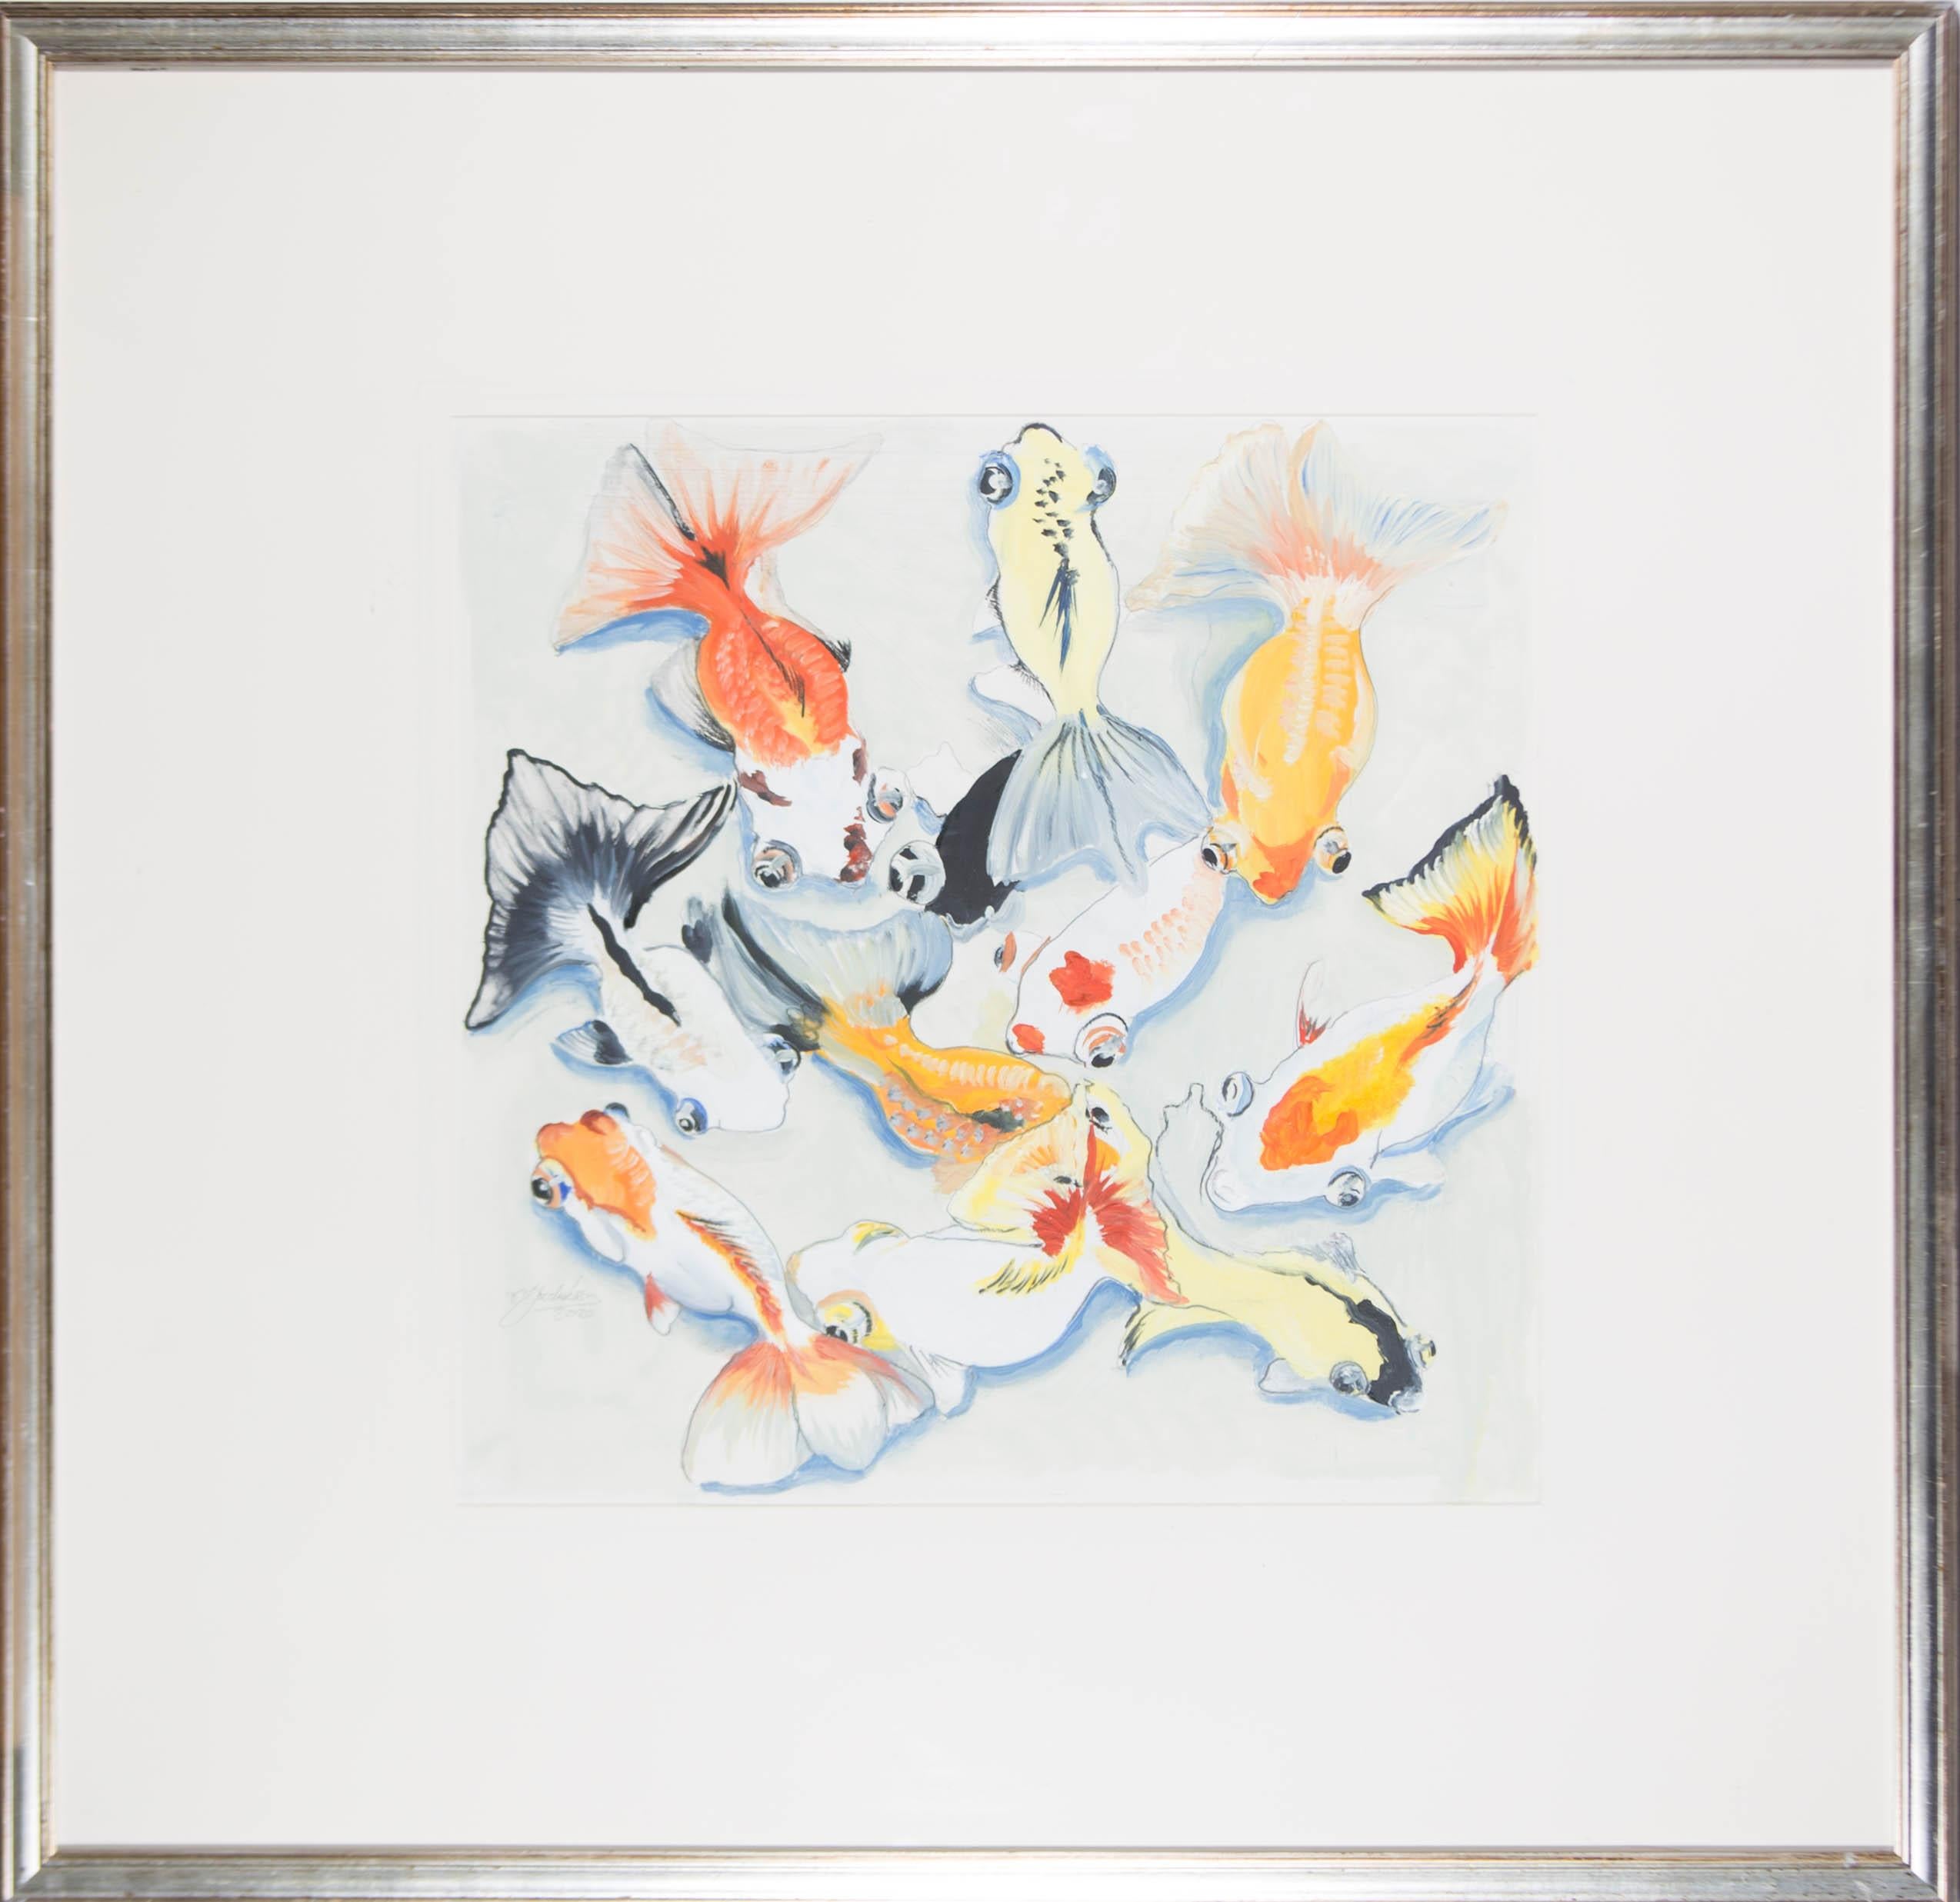 A softened palette depicts carp in an aesthetically pleasing manner.Well presented in a molded silvered wood frame.Signed and dated.

On wove.